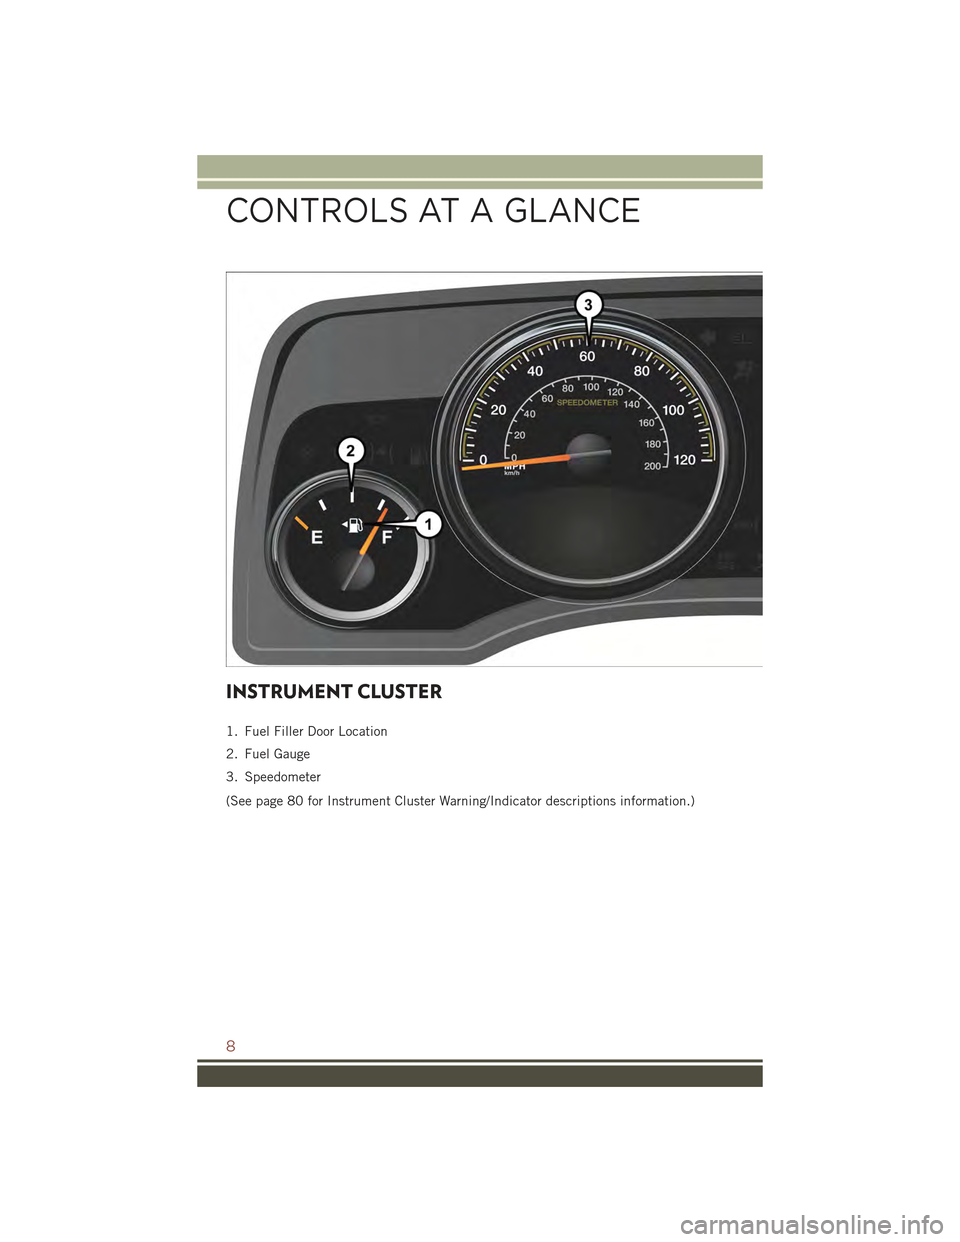 JEEP COMPASS 2015 1.G User Guide INSTRUMENT CLUSTER
1. Fuel Filler Door Location
2. Fuel Gauge
3. Speedometer
(See page 80 for Instrument Cluster Warning/Indicator descriptions information.)
CONTROLS AT A GLANCE
8 